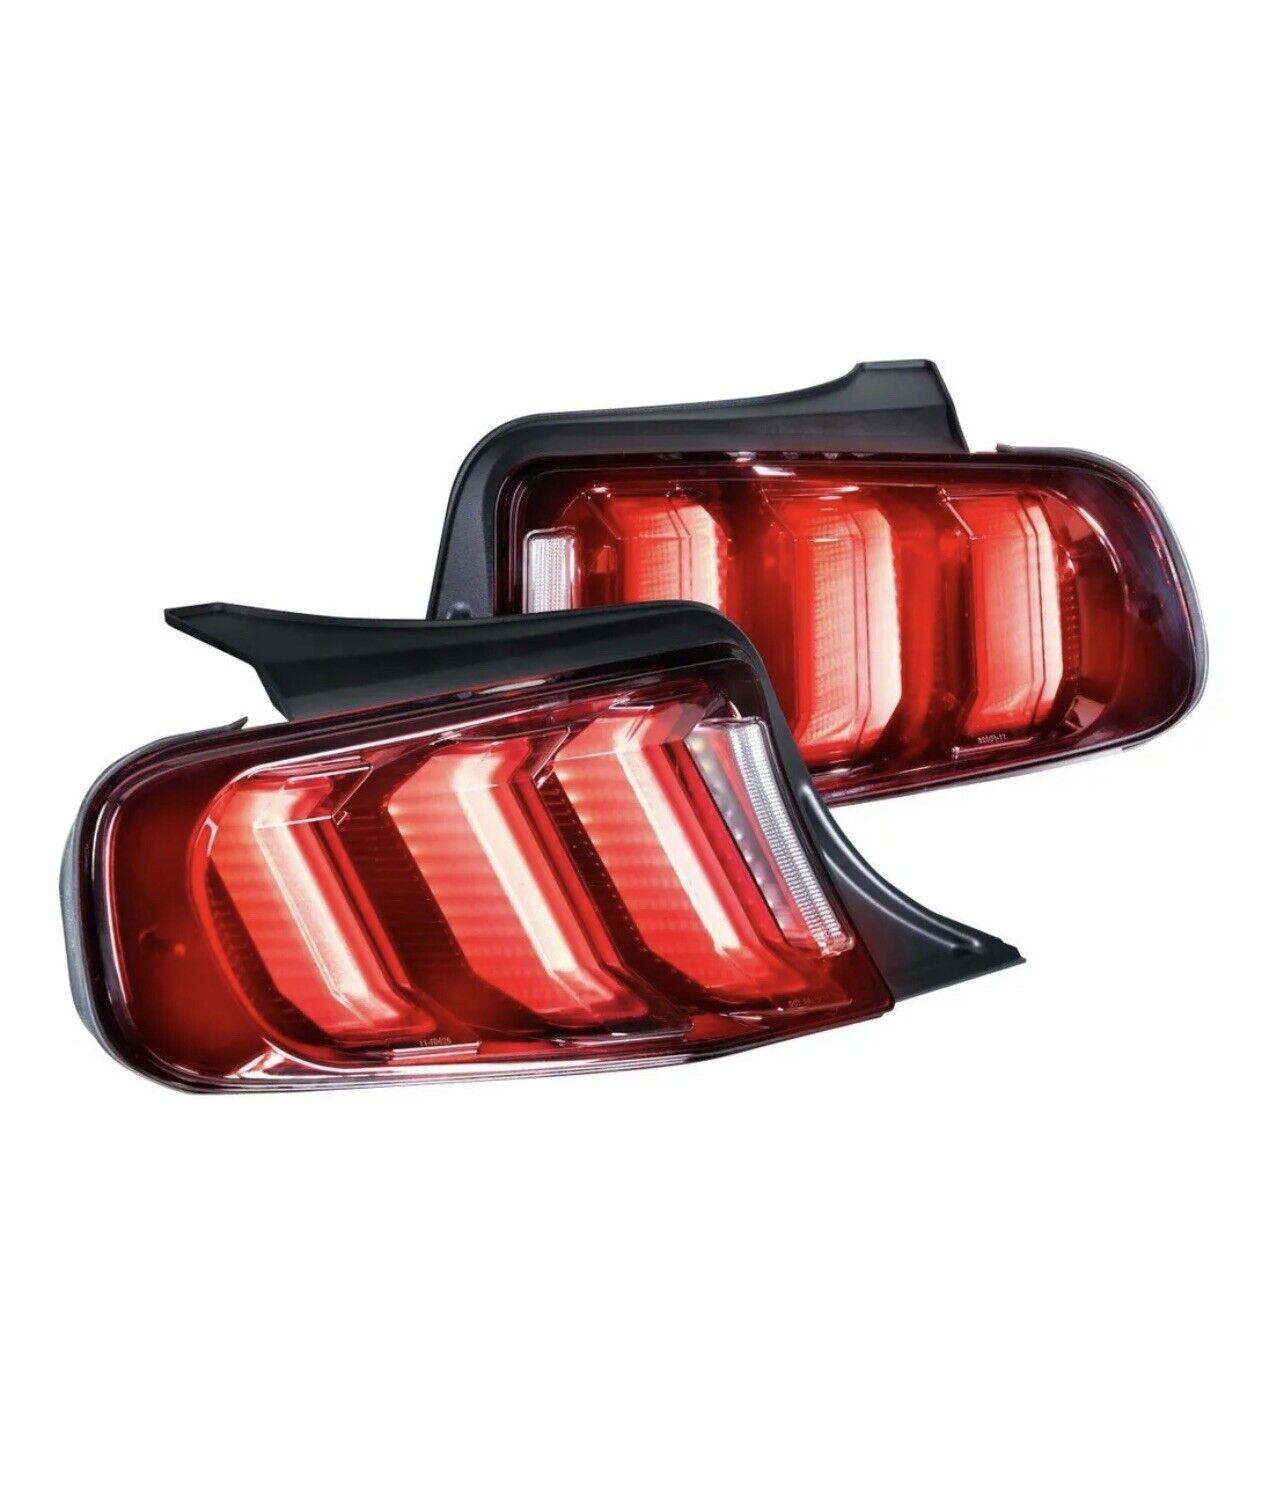 2013-2014 Fits Ford Mustang LED XB Tail Lights Facelift By Morimoto SMK